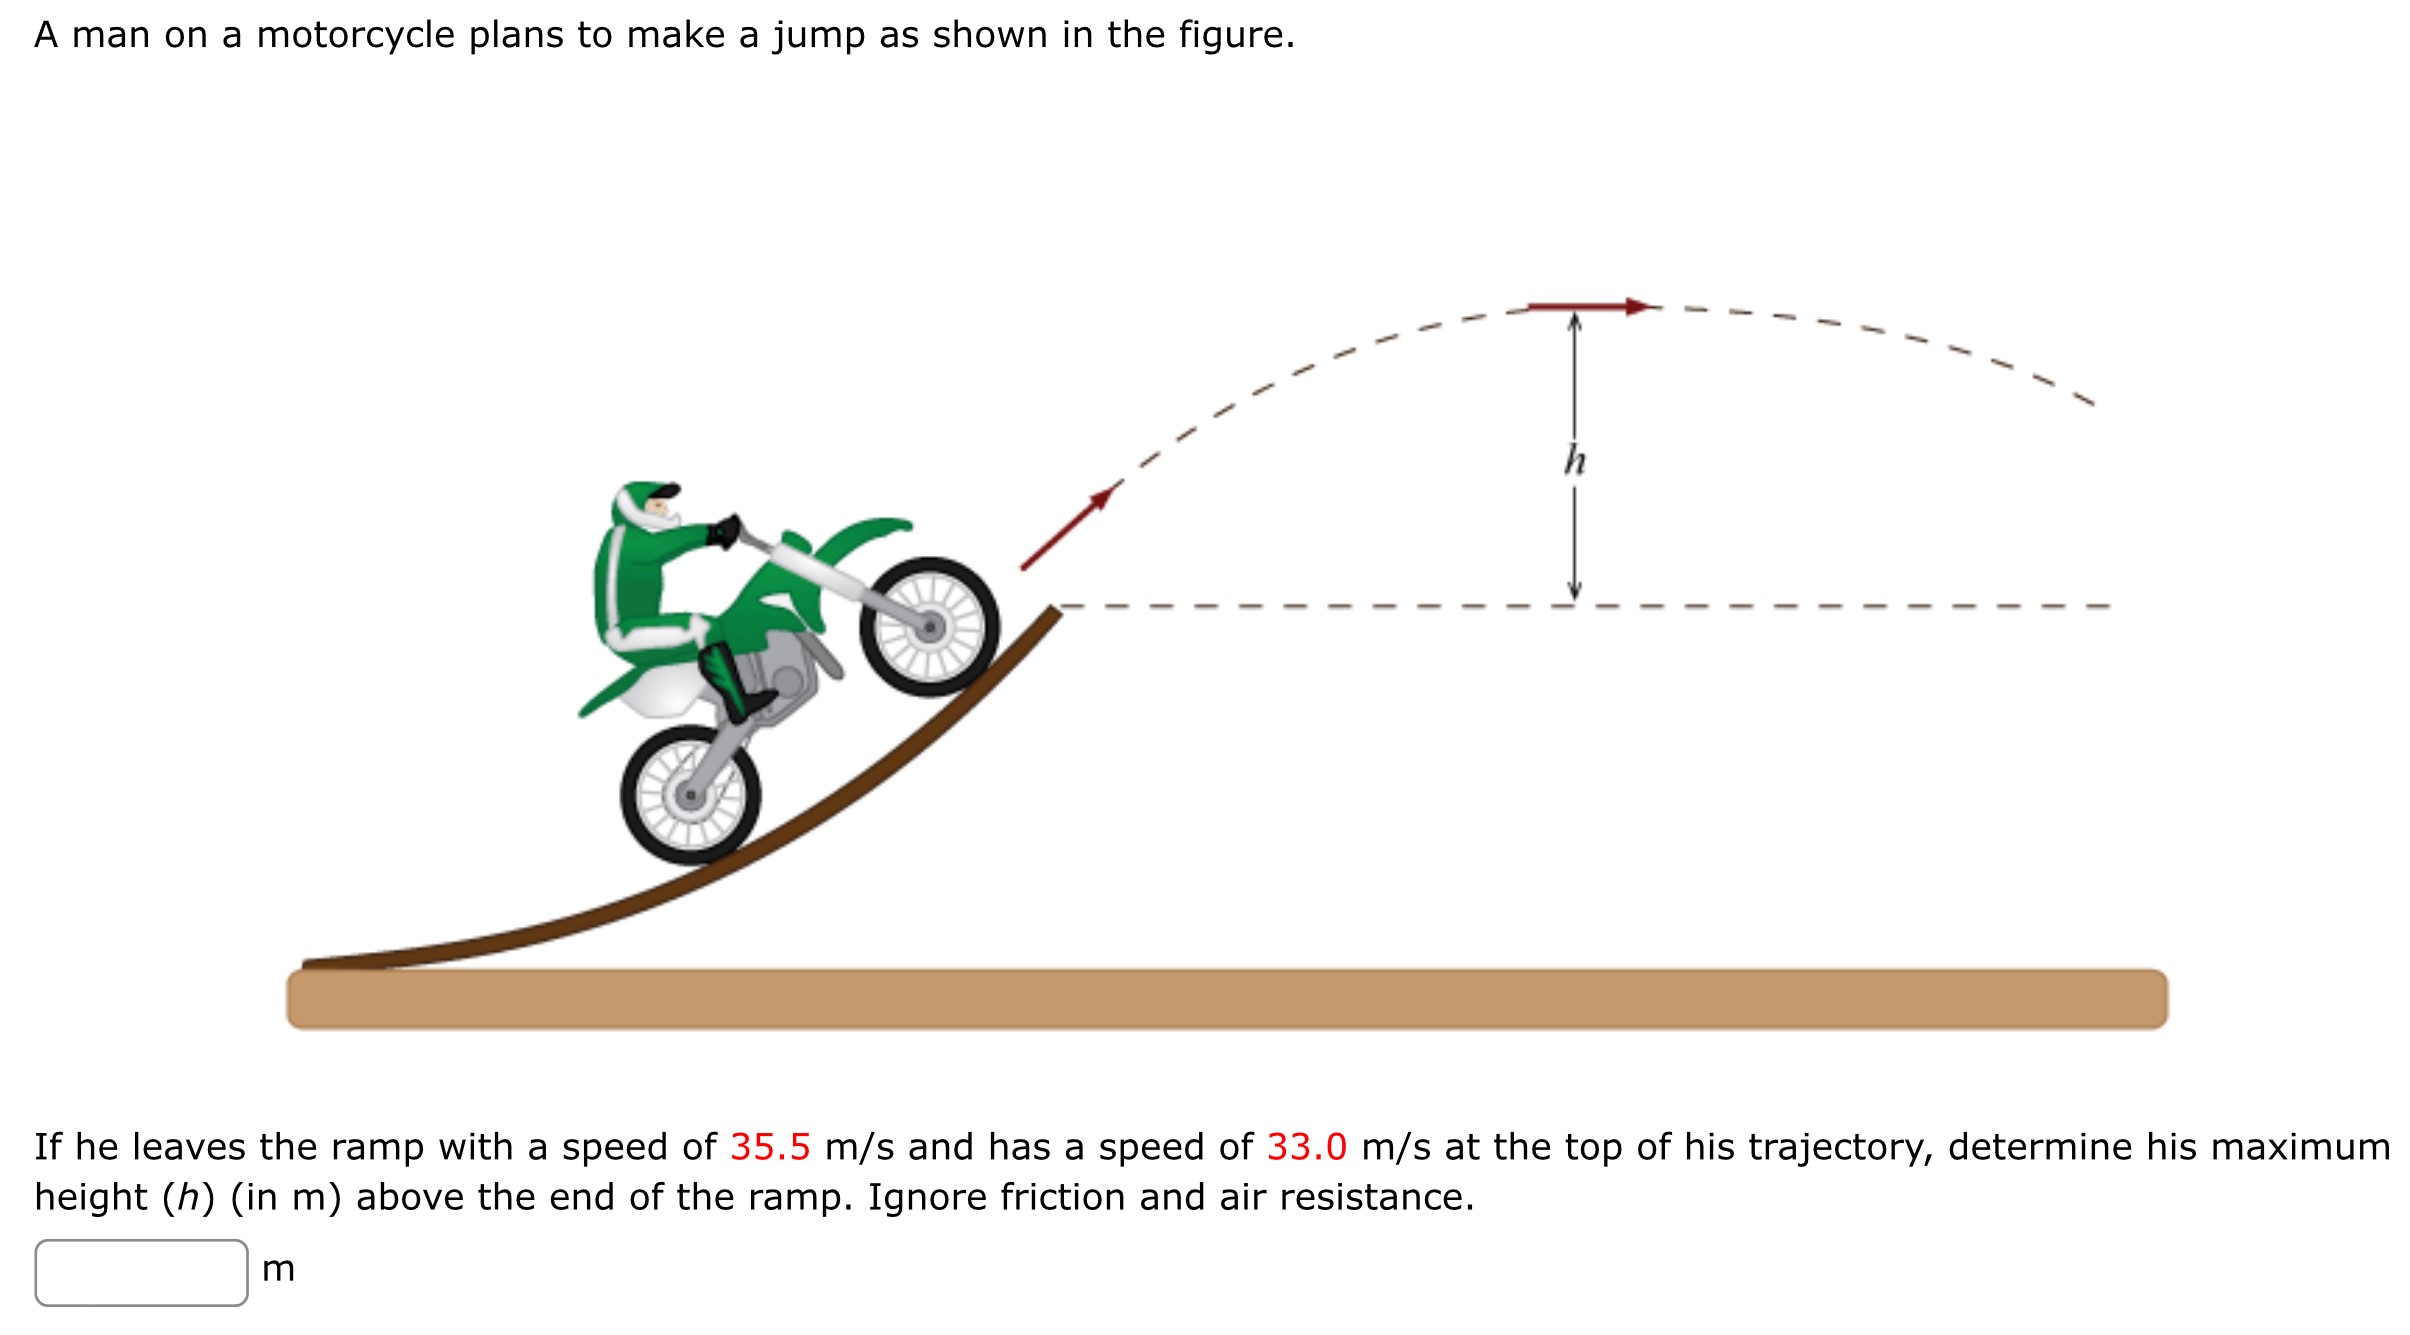 A man on a motorcycle plans to make a jump as shown in the figure. If he leaves the ramp with a speed of 35.5 m/s and has a speed of 33.0 m/s at the top of his trajectory, determine his maximum height (h) (in m) above the end of the ramp. Ignore friction and air resistance. m 